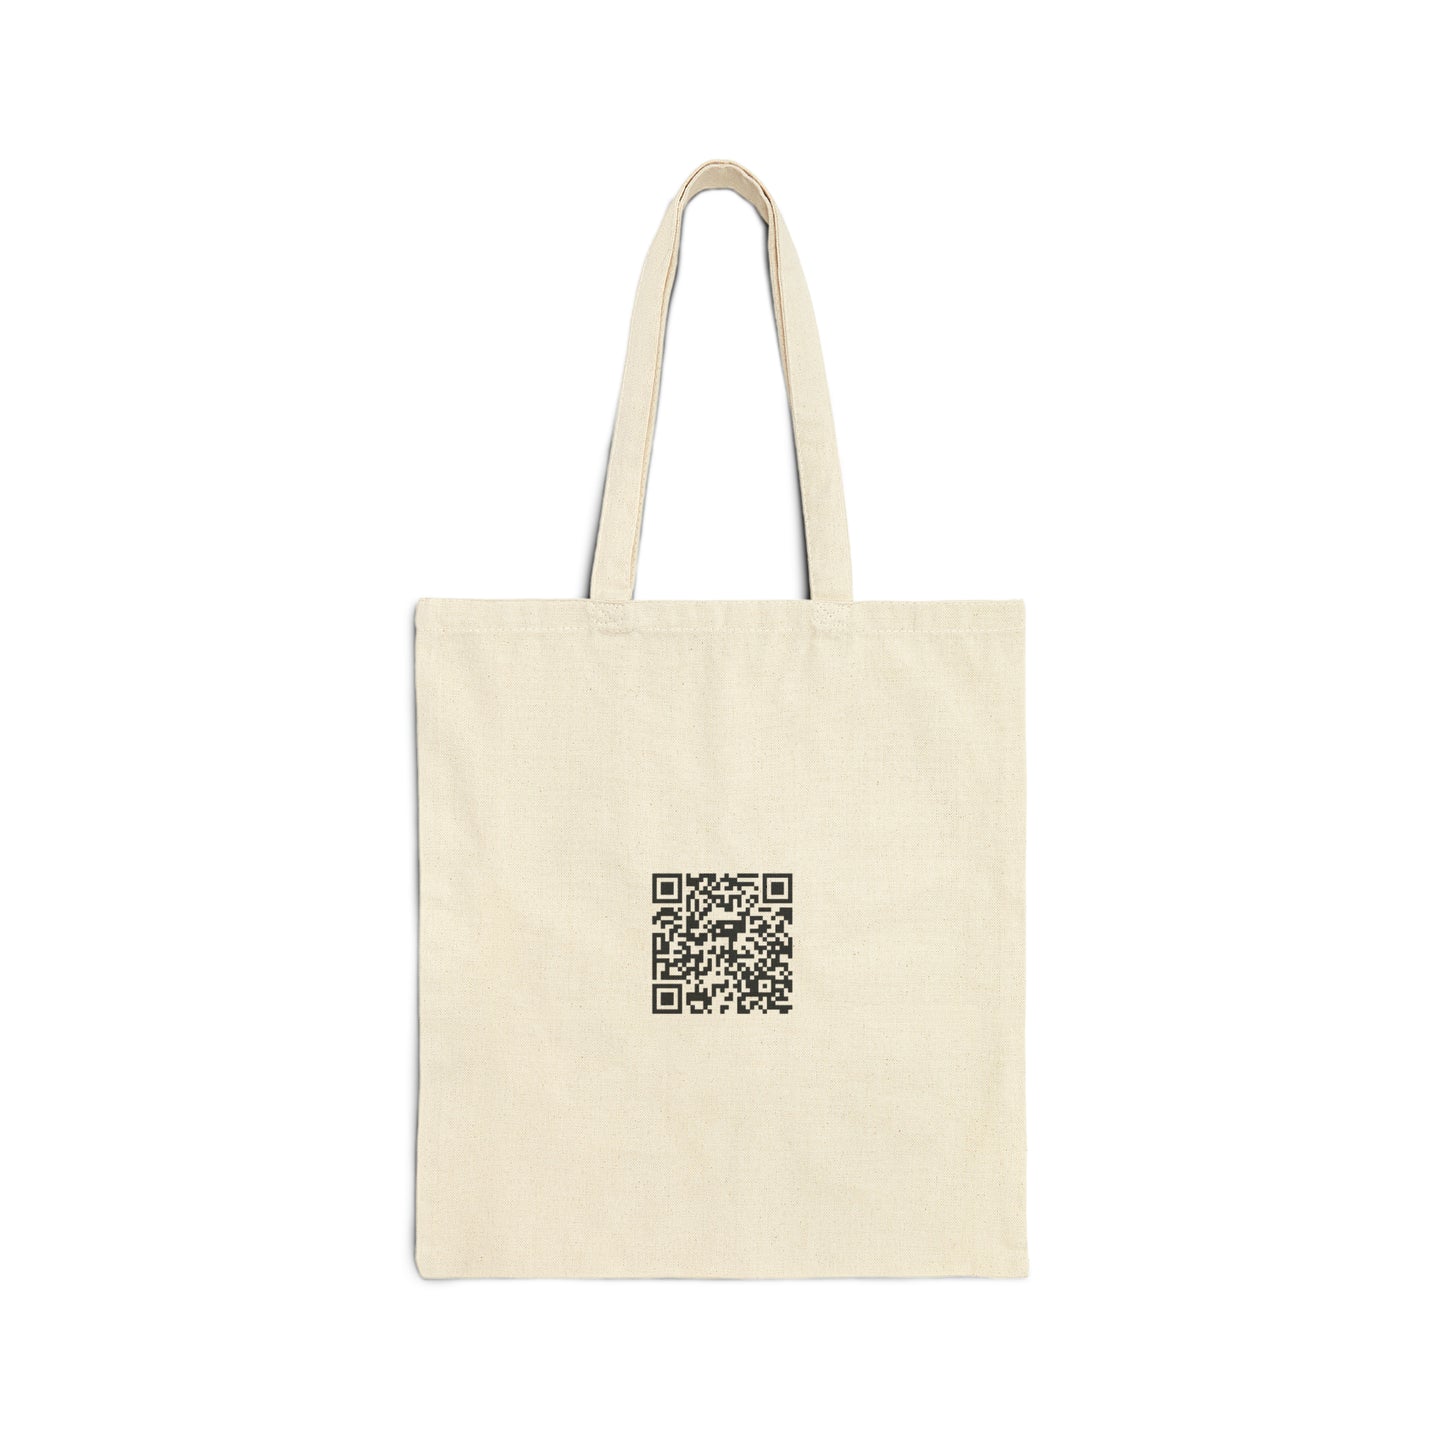 A Mystery On Tyneside - Cotton Canvas Tote Bag